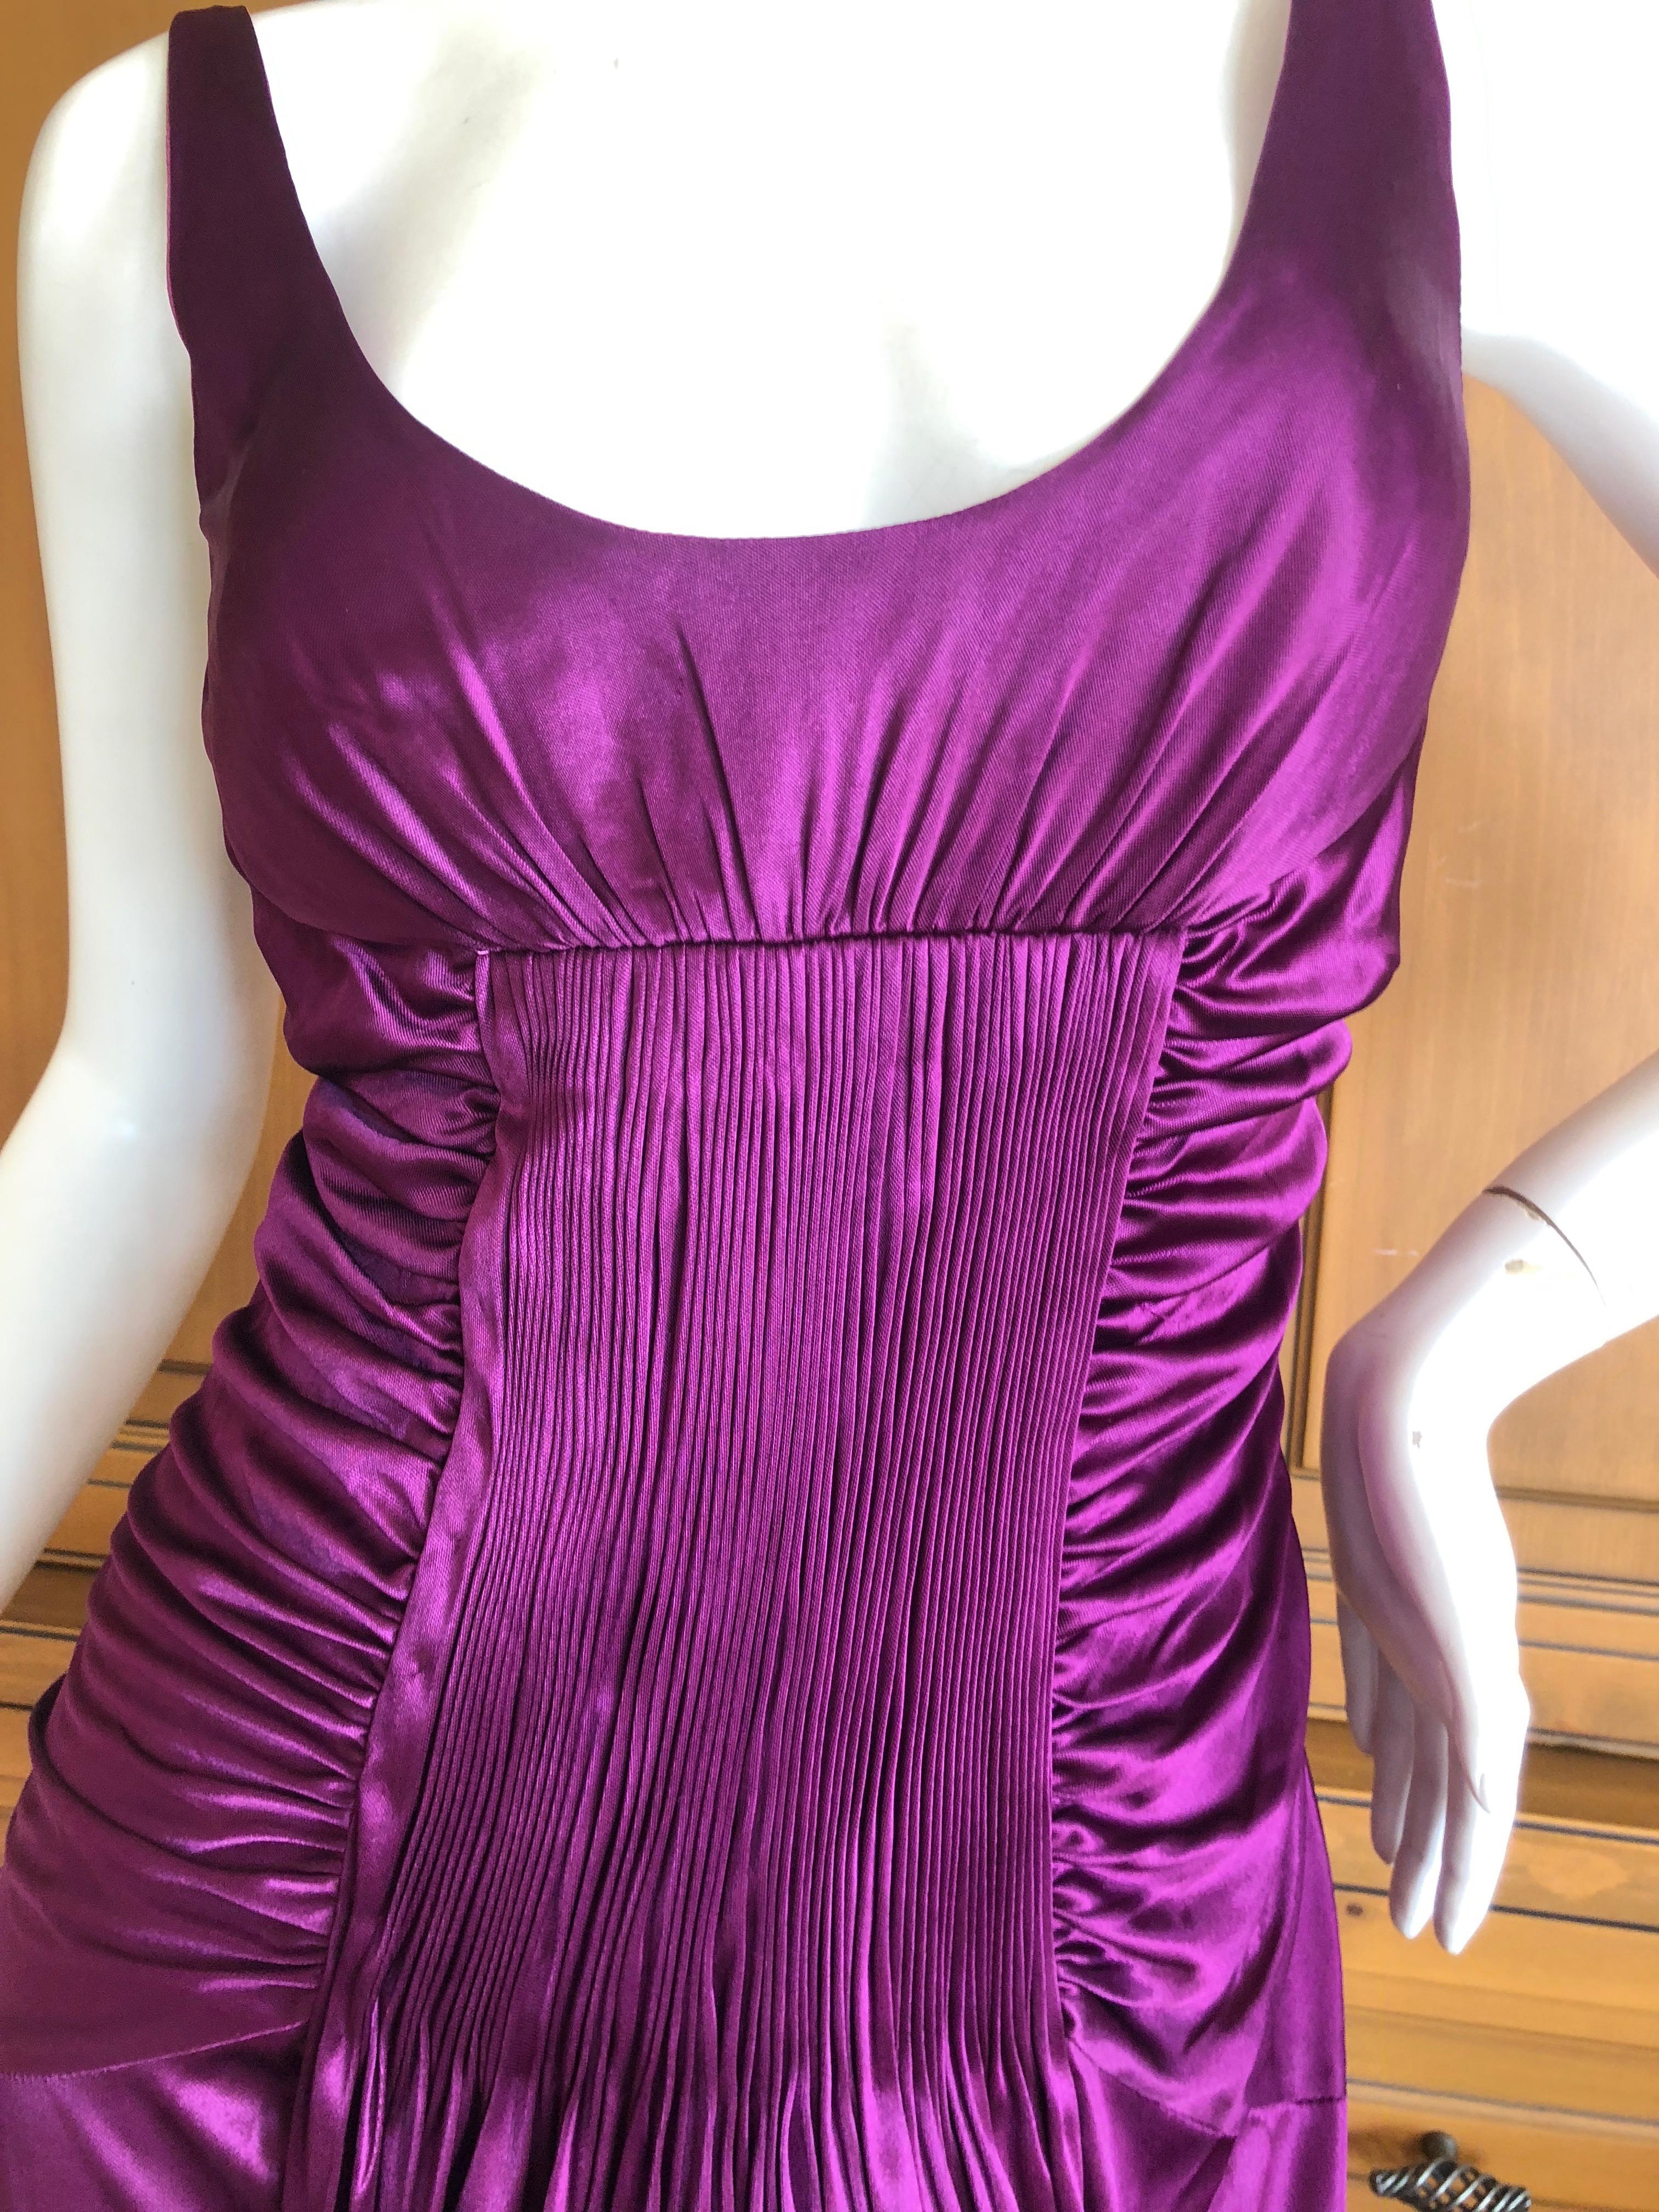 Versace Vintage Pleated Purple Jersey Low Cut Cocktail Dress with Low Cut Back In Excellent Condition For Sale In Cloverdale, CA